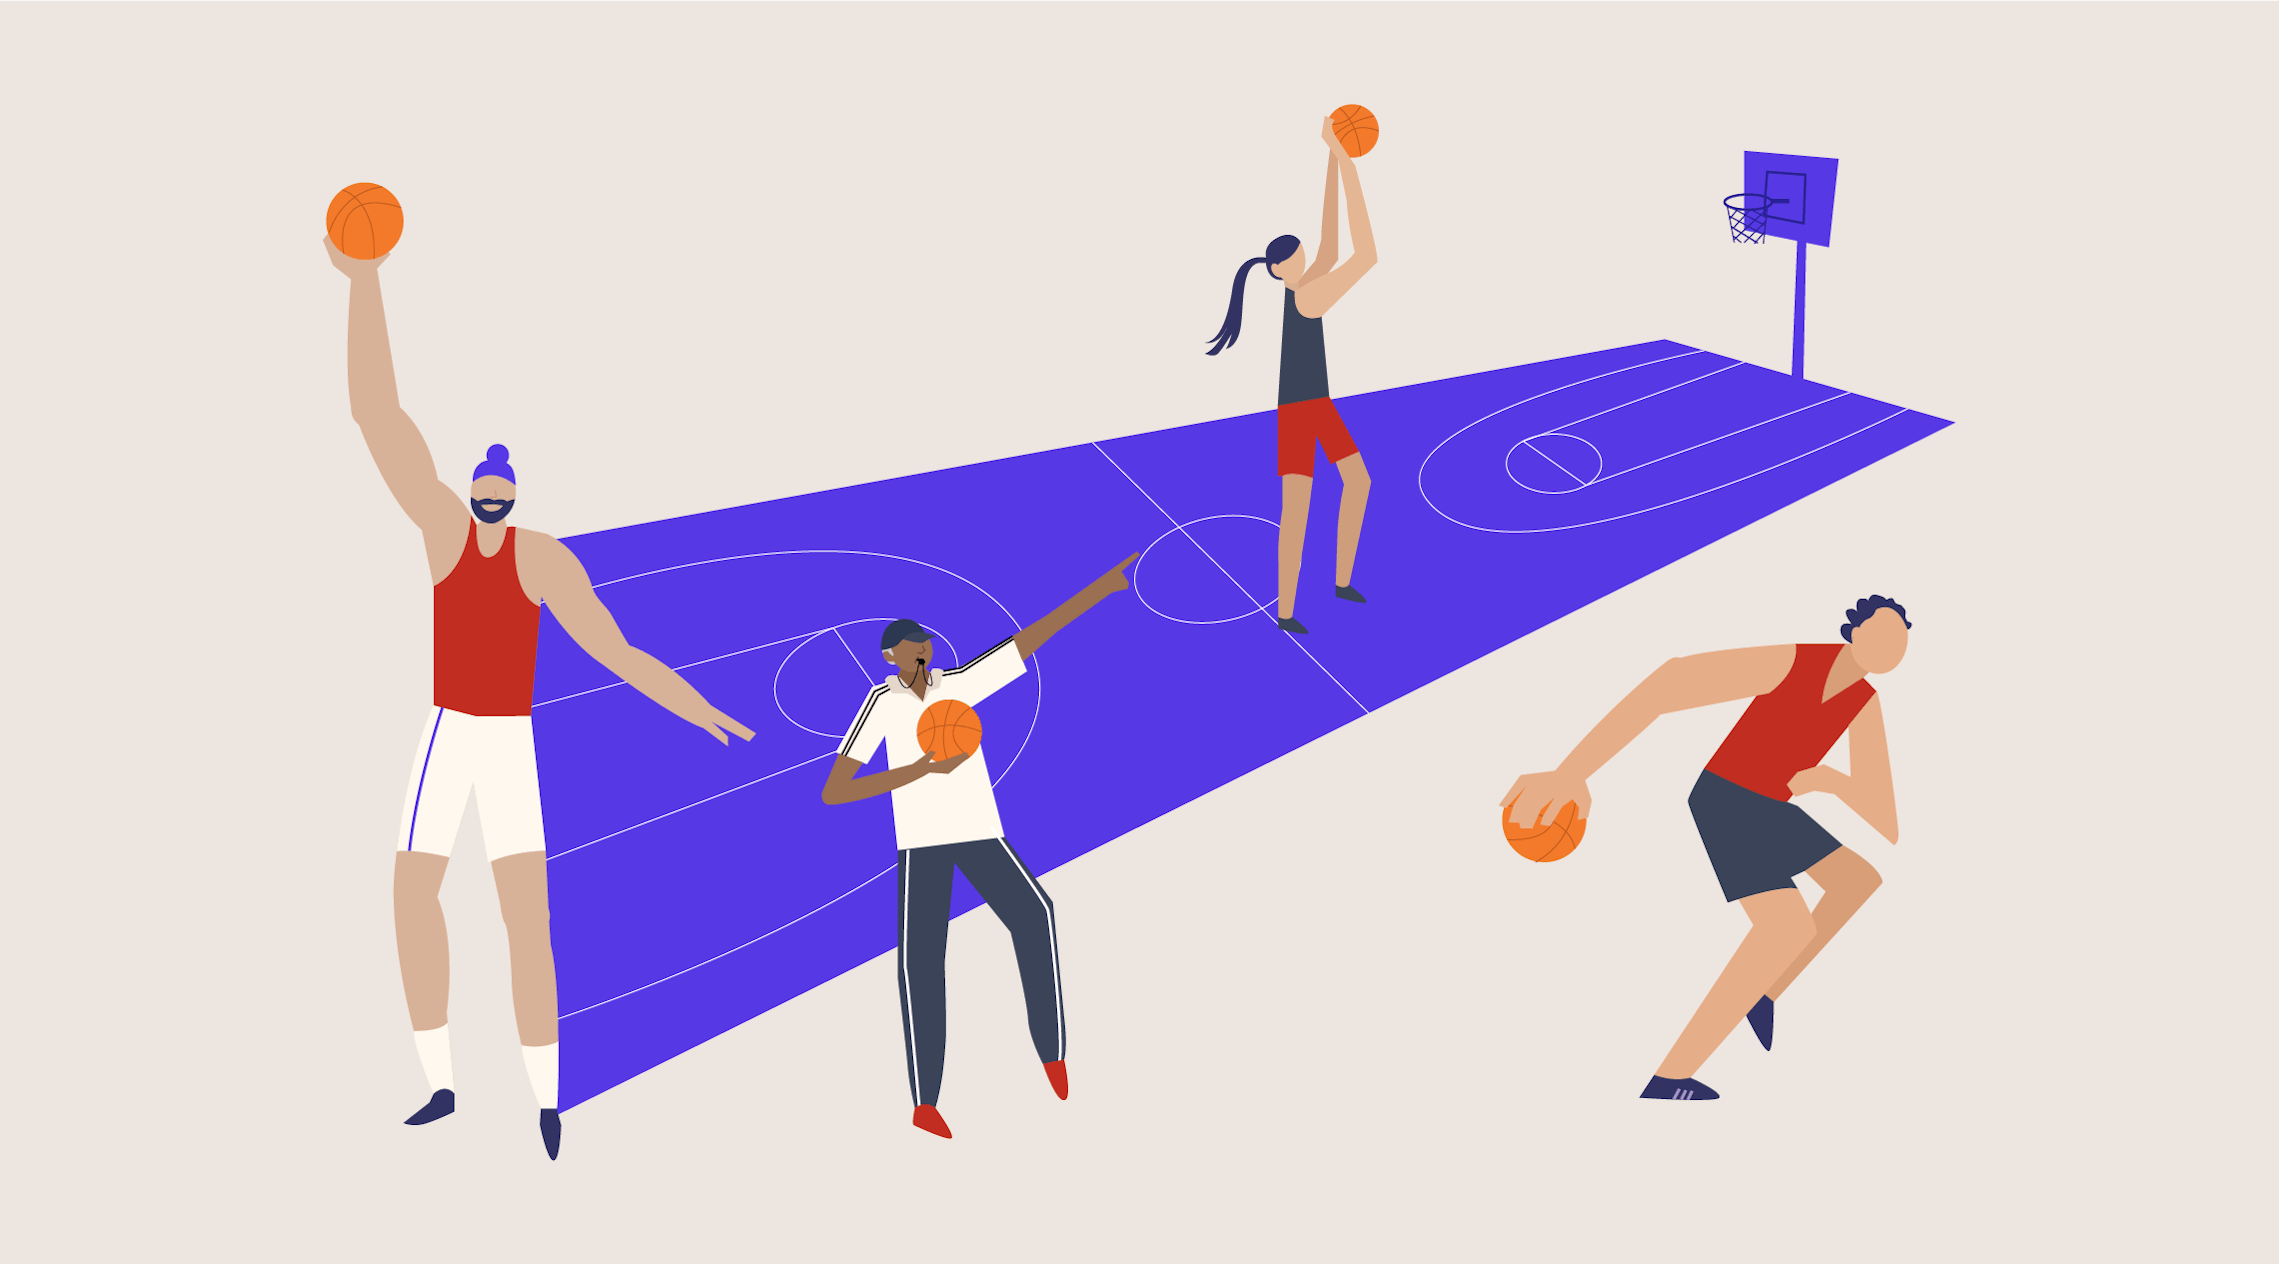 The Bounce by Karan Madhok; Illustration by Akshaya Zachariah for FiftyTwo.in